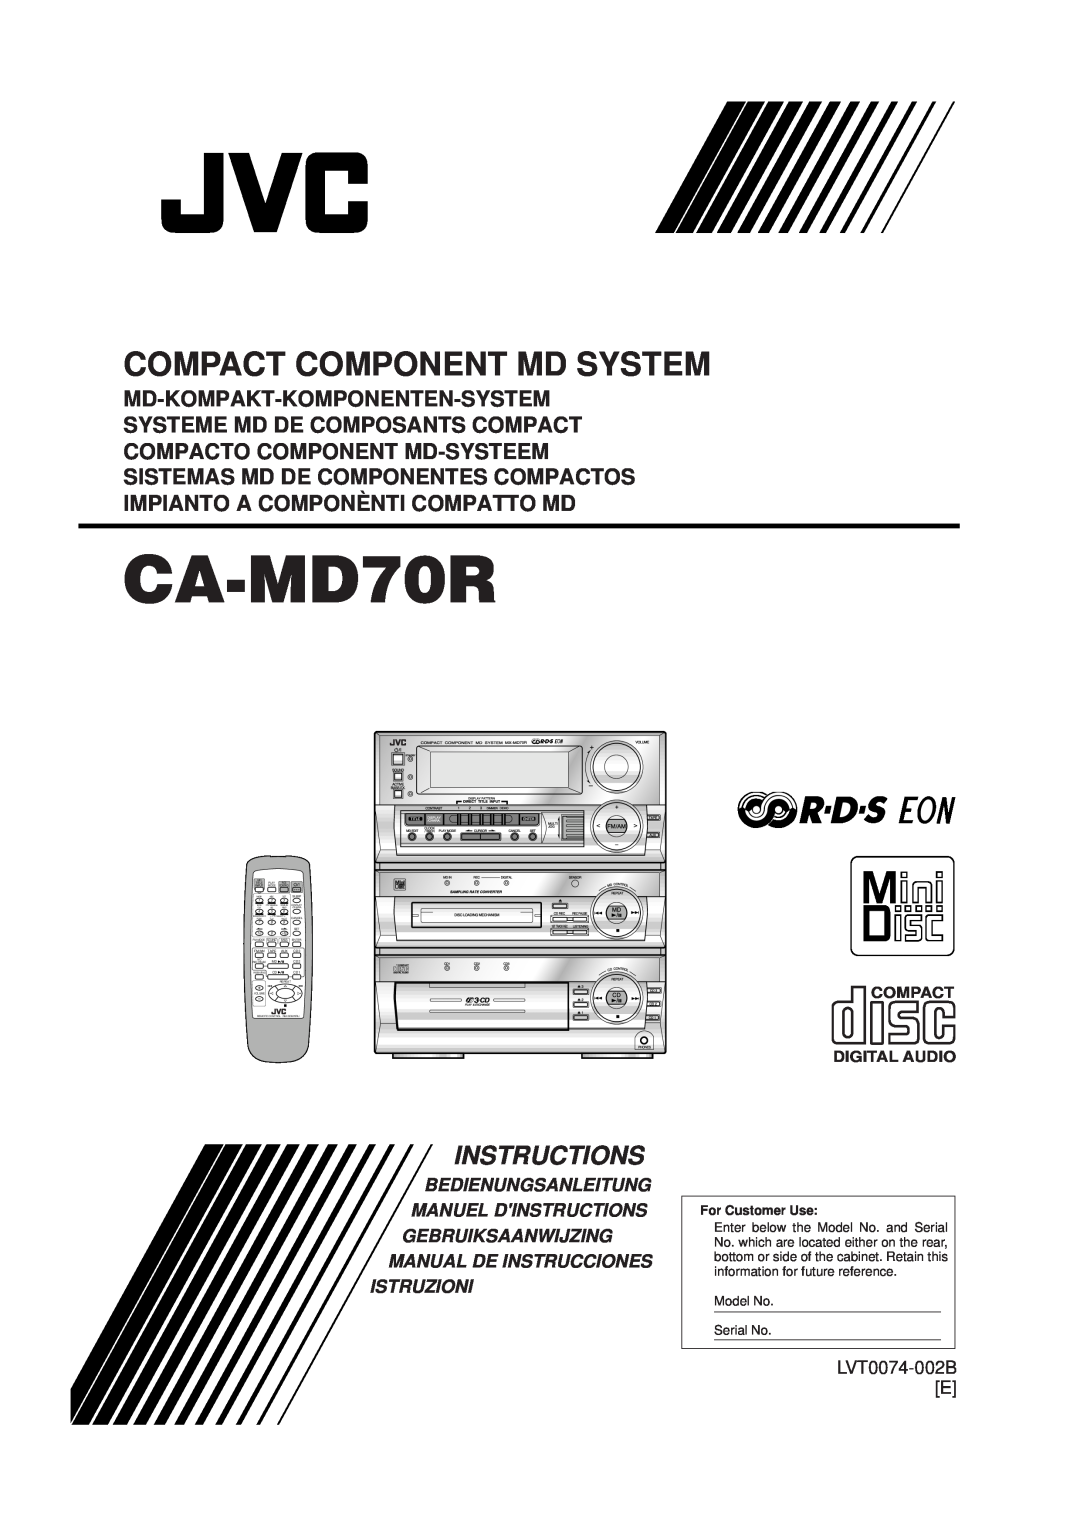 JVC CA-MD70R manual Compact Component Md System, Instructions, Bedienungsanleitung Manuel Dinstructions, Istruzioni 